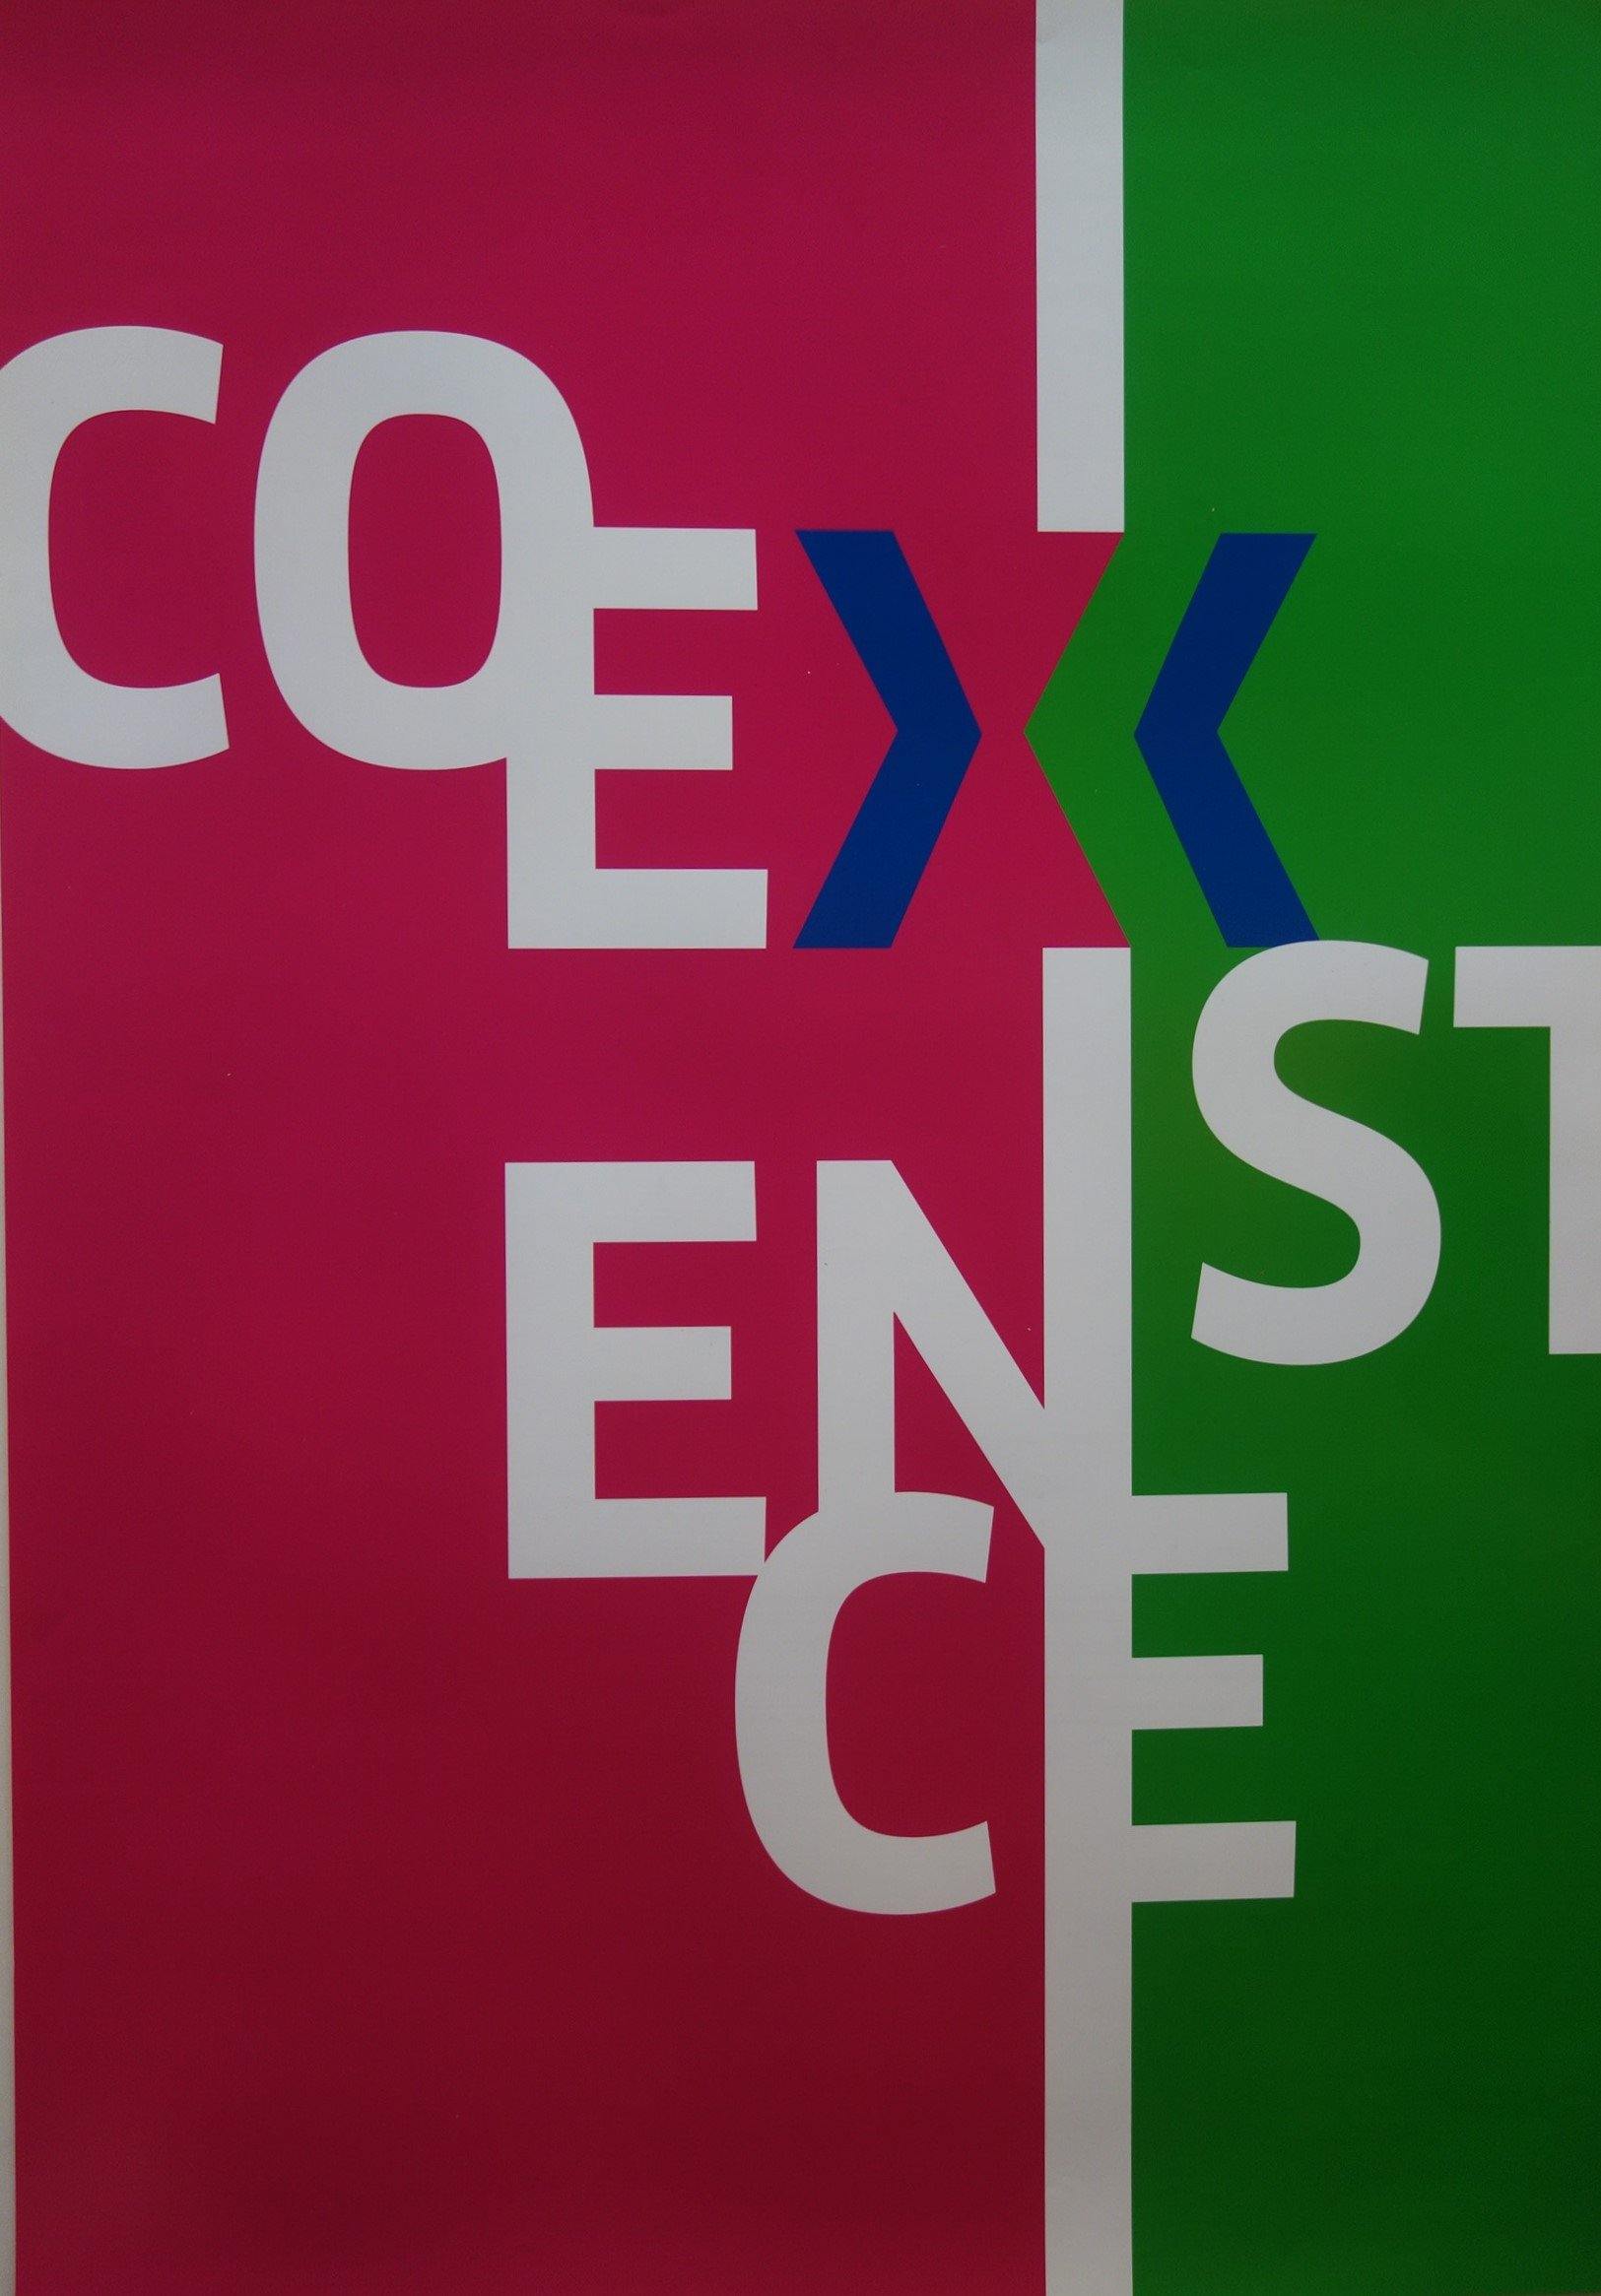 "Coexistence" written down page on top of page split part red and part green background